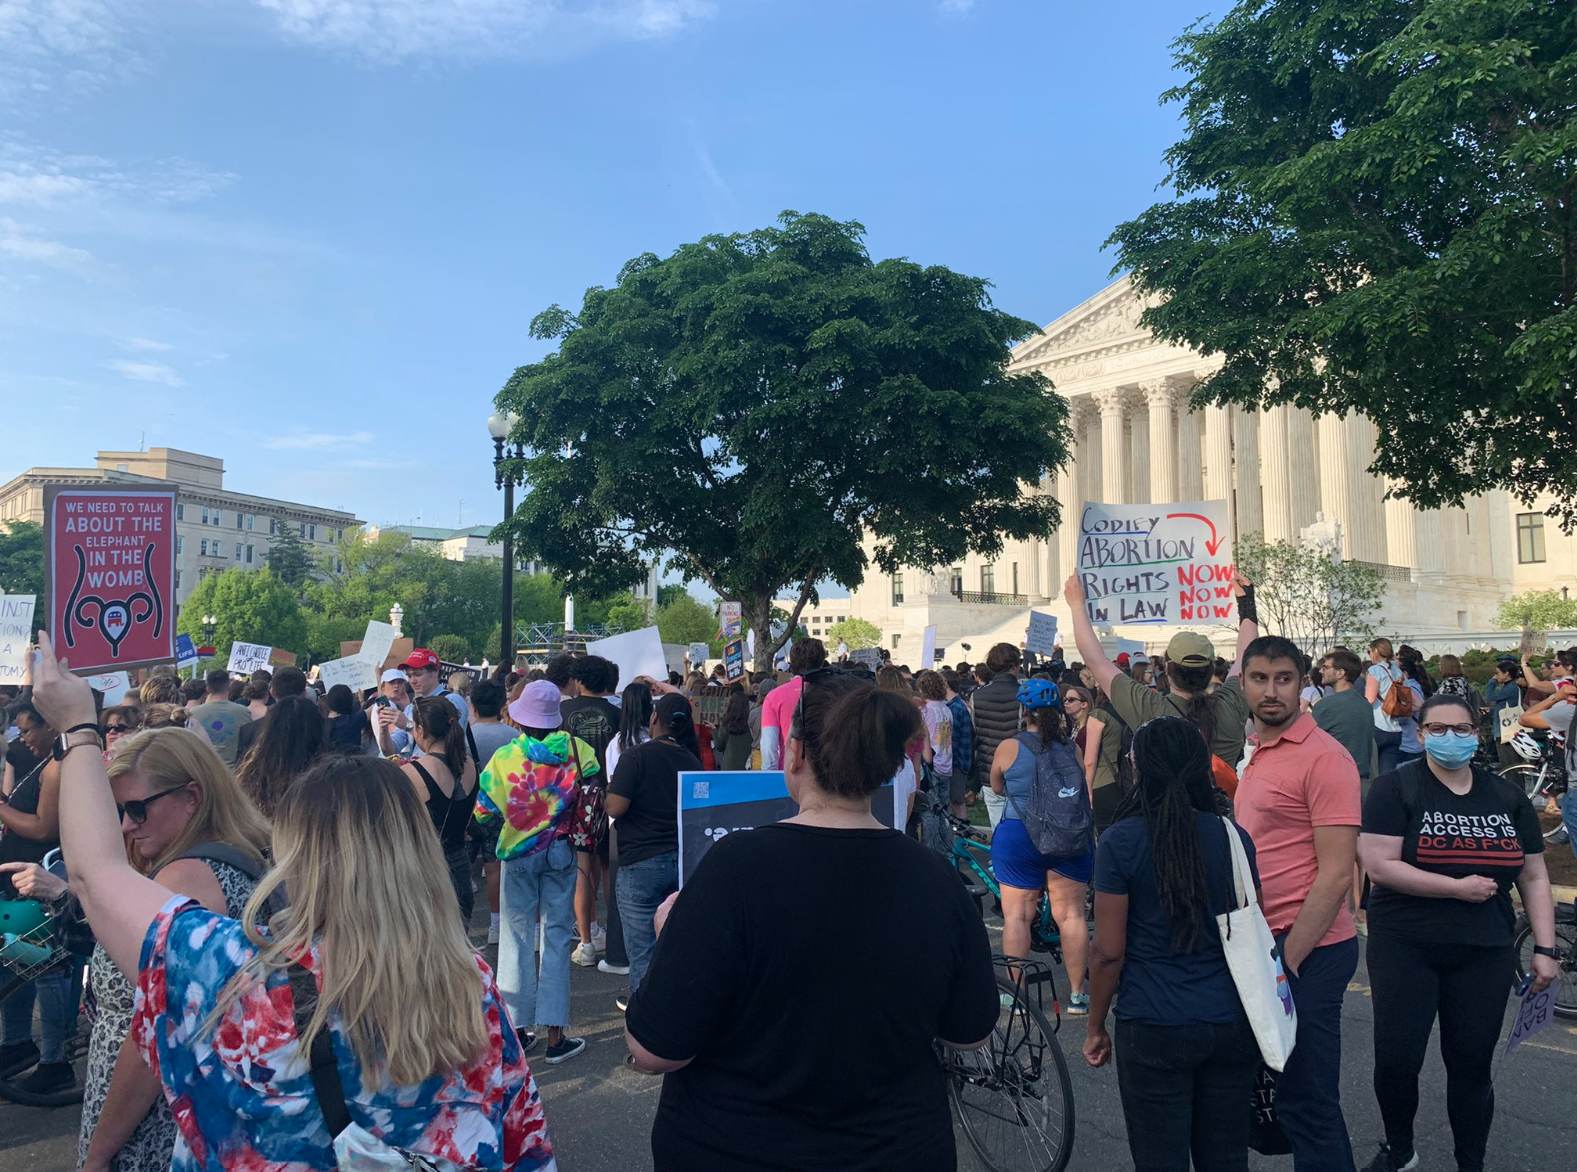 Demonstrators face off at Supreme Court following Roe draft leak